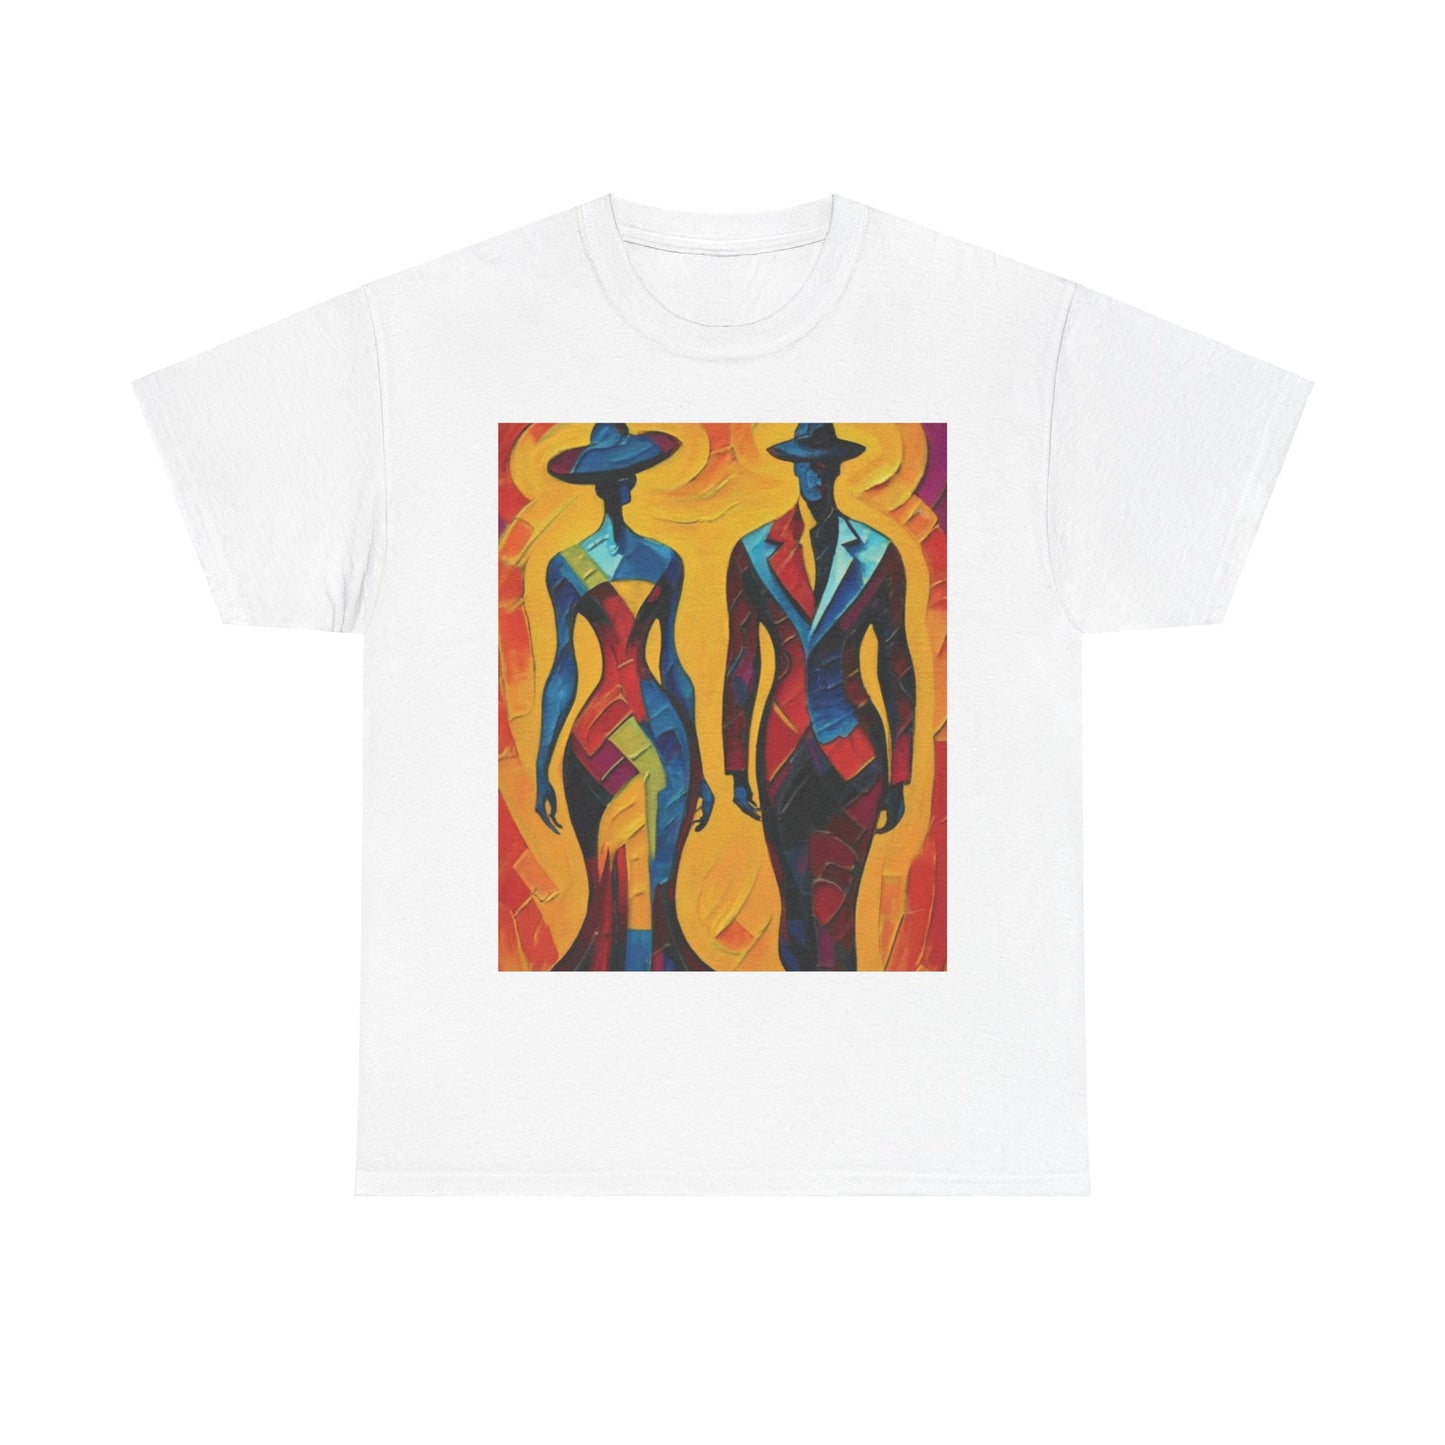 "Steppin' Out" T-shirt